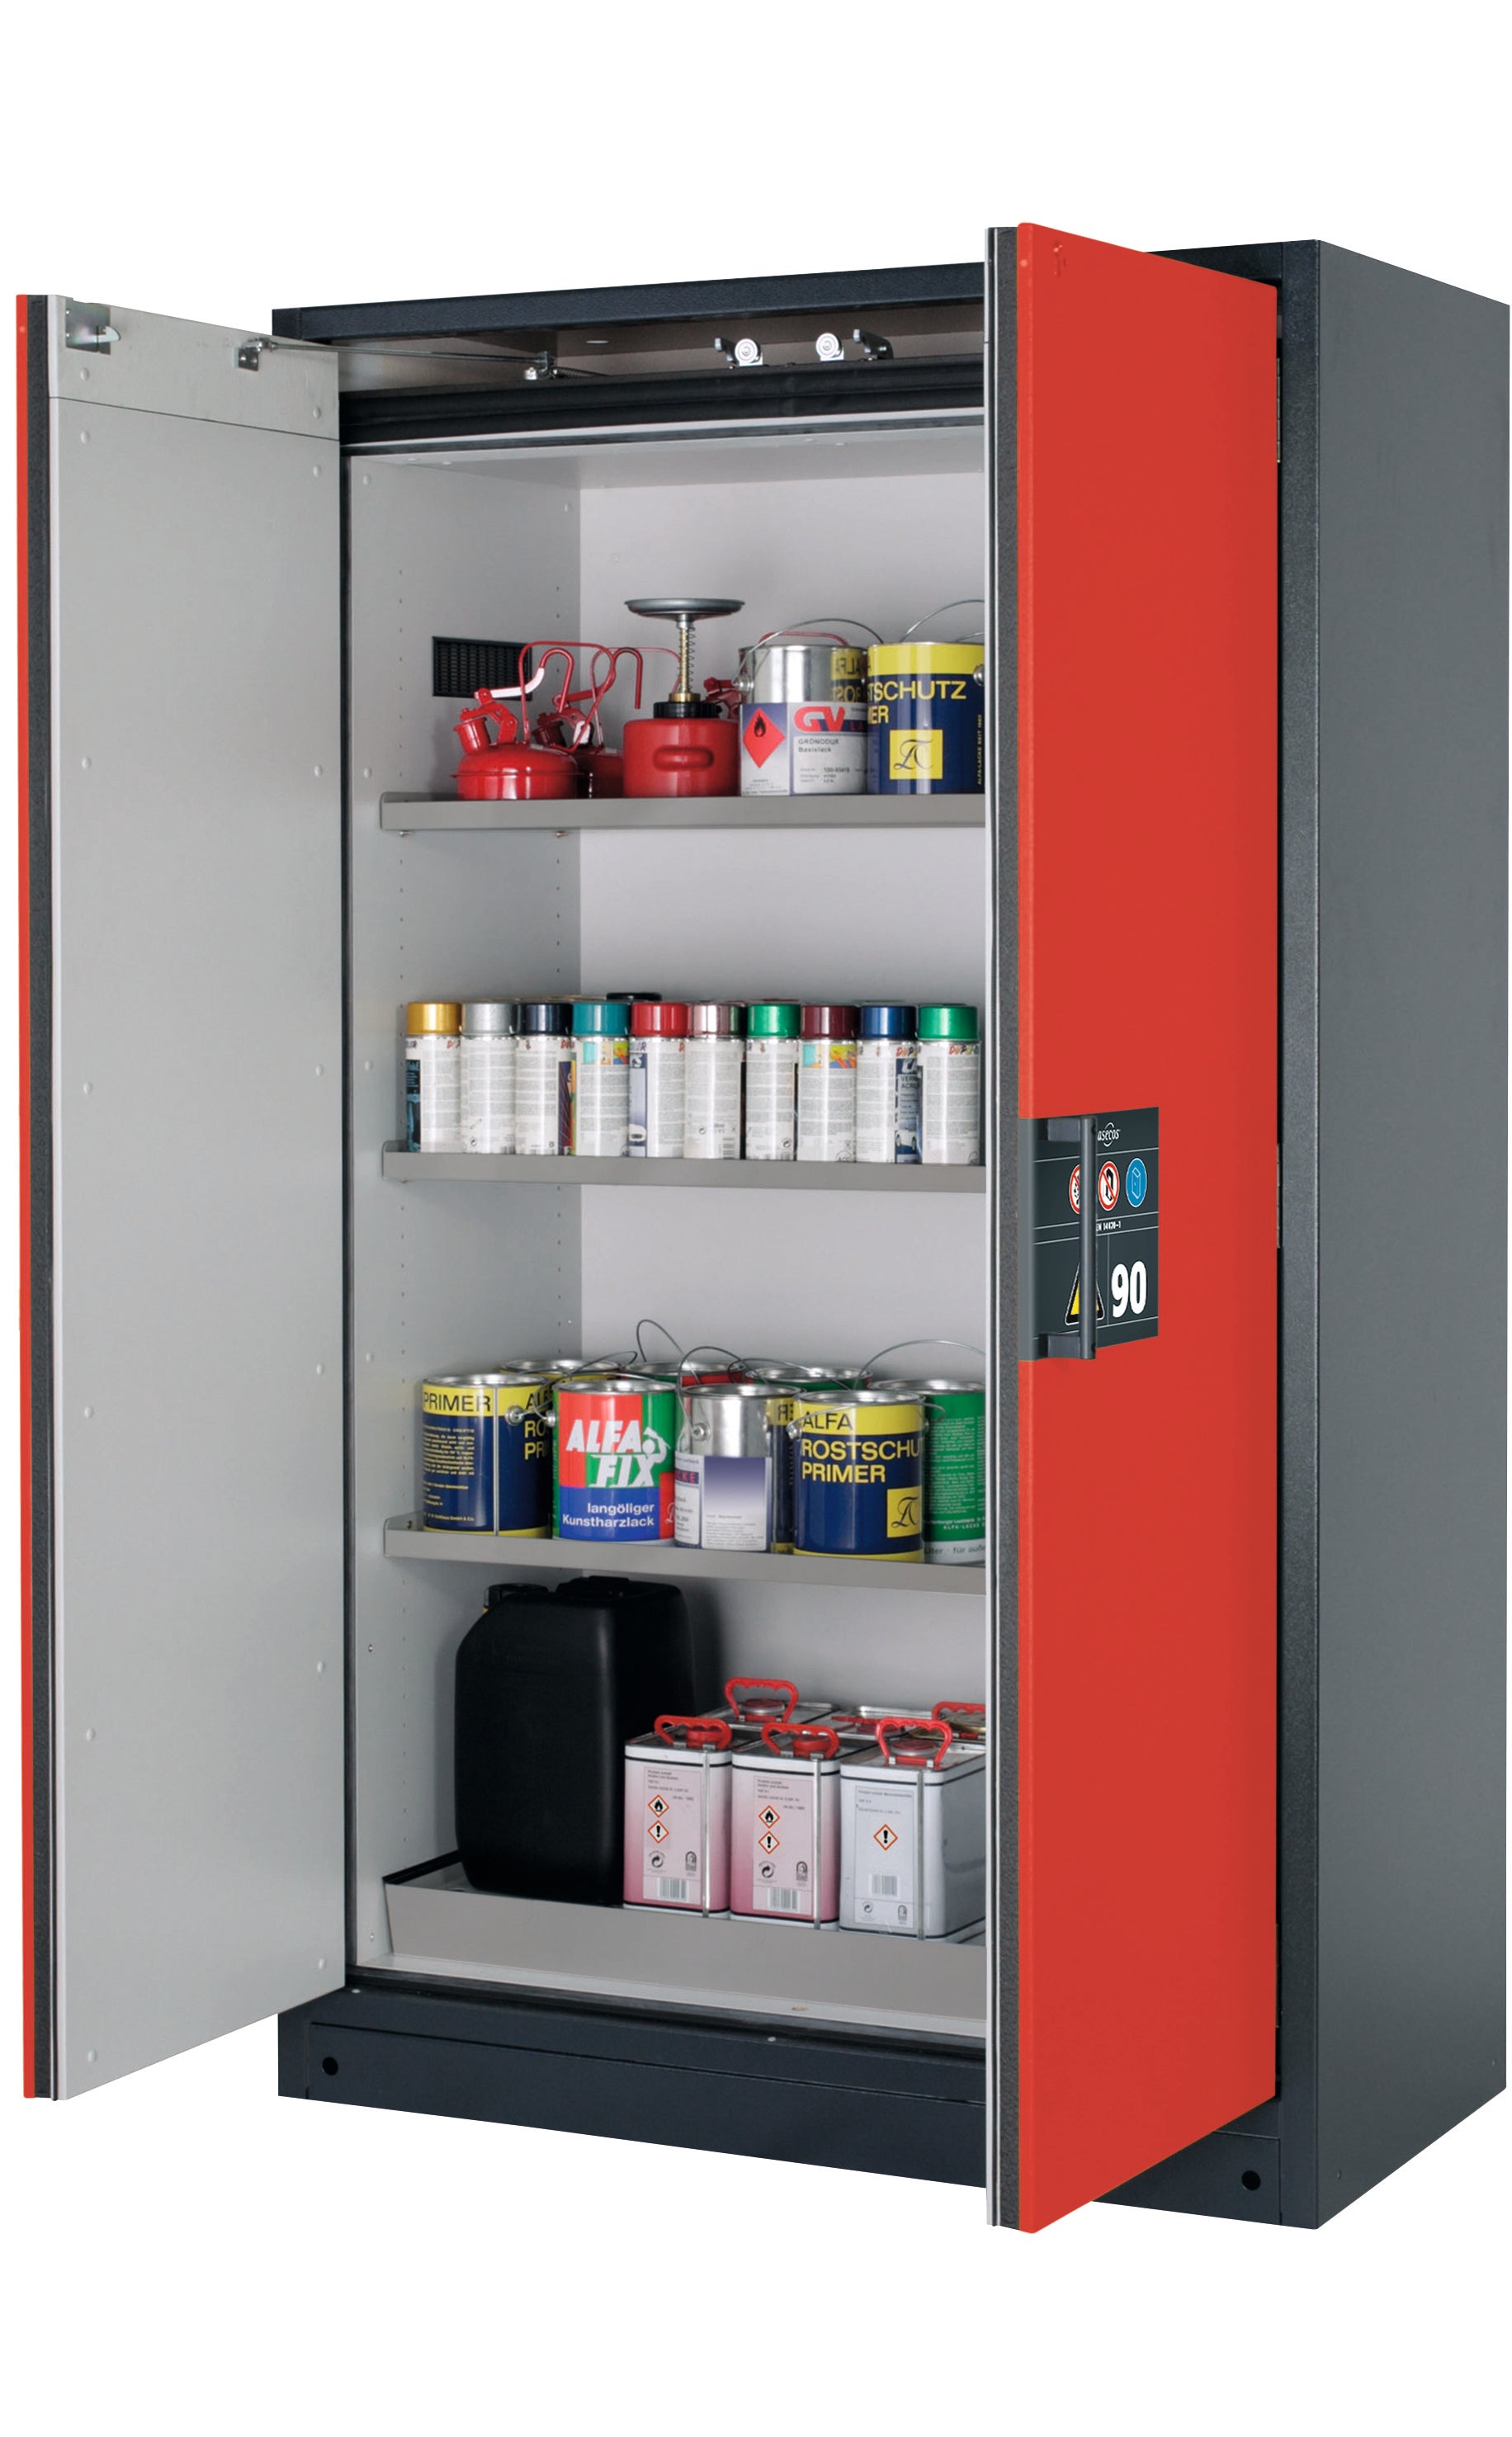 Type 90 safety storage cabinet Q-CLASSIC-90 model Q90.195.120 in traffic red RAL 3020 with 3x shelf standard (stainless steel 1.4301),